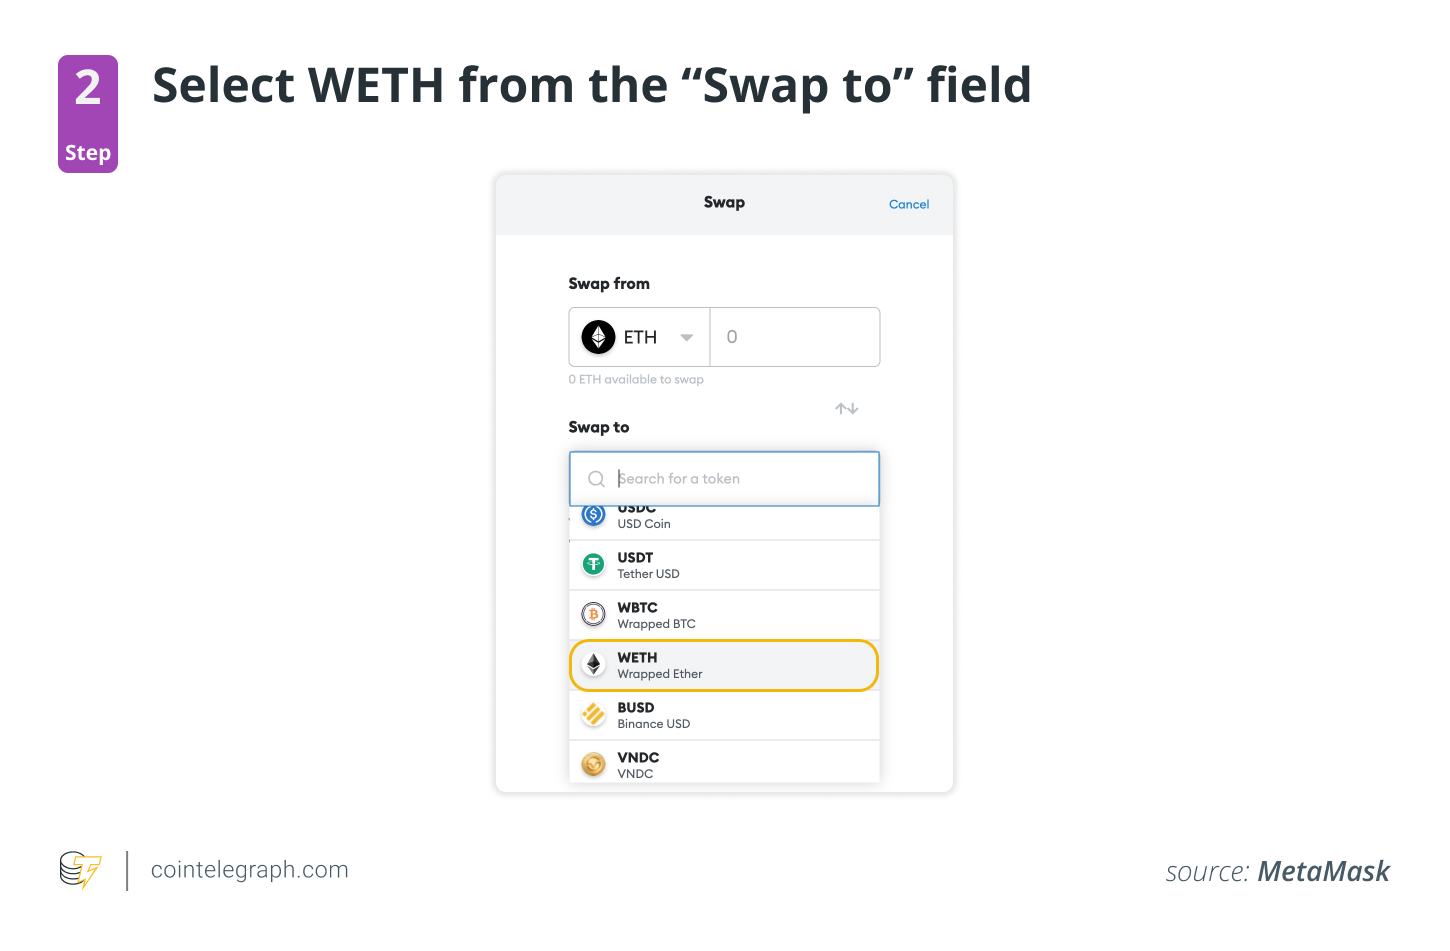 Step 2: Select WETH from the “Swap to” field